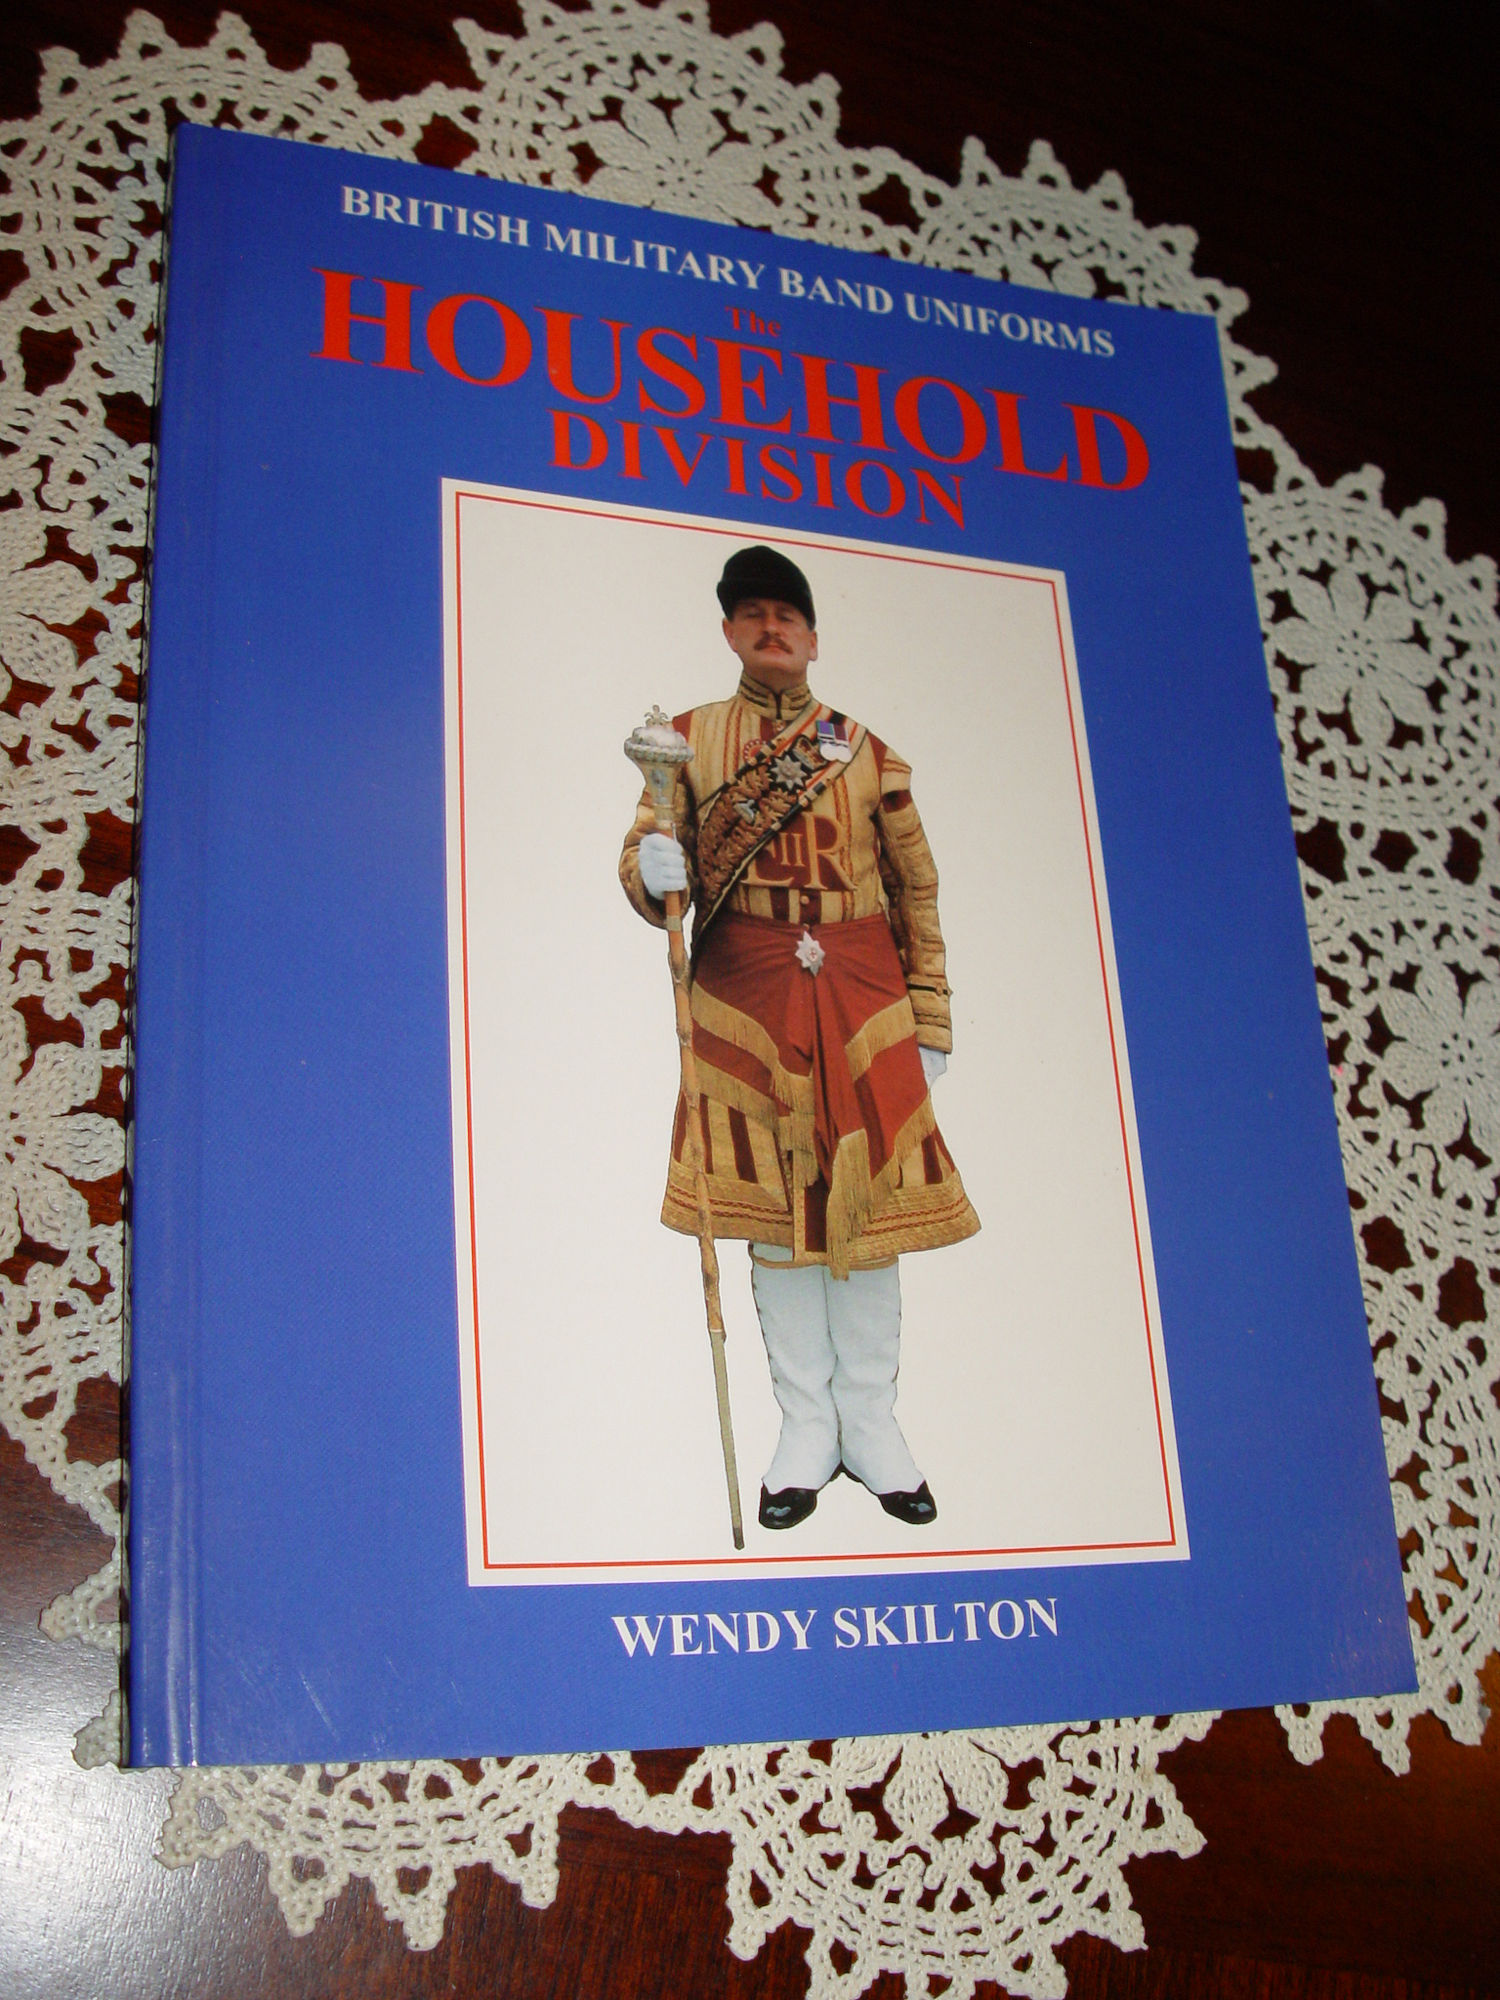 British Military
                        Band Uniforms - The Household Division 1992 by
                        Wendy Skilton